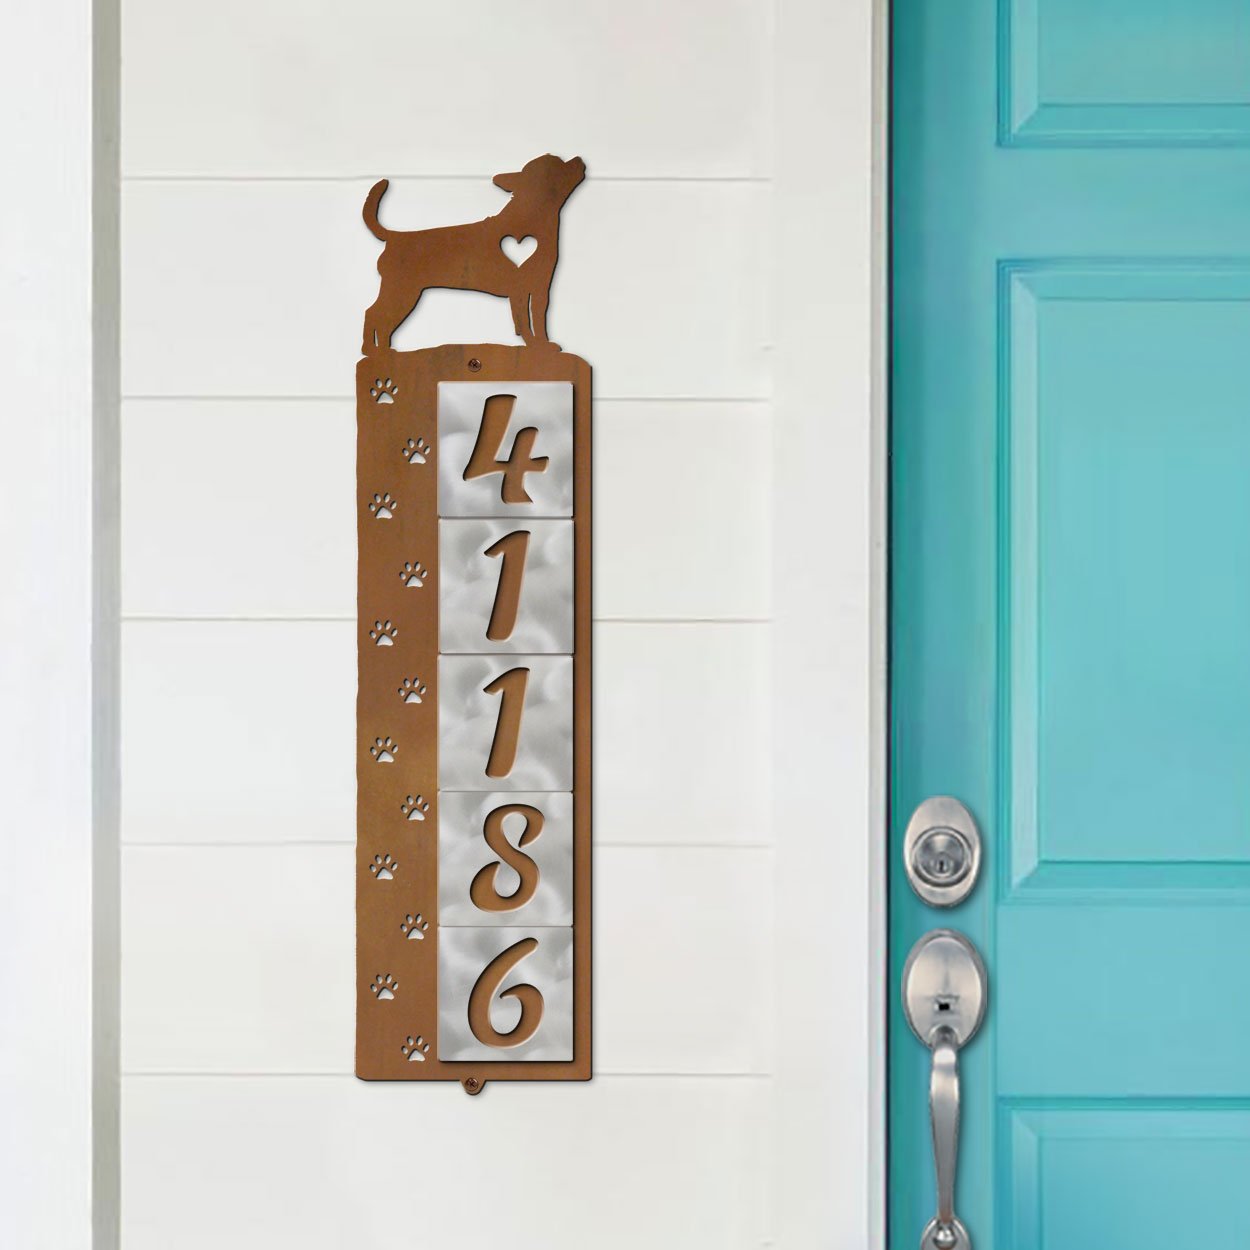 606175 - Chihuahua Nose Prints 5-Digit Vertical Tile House Numbers